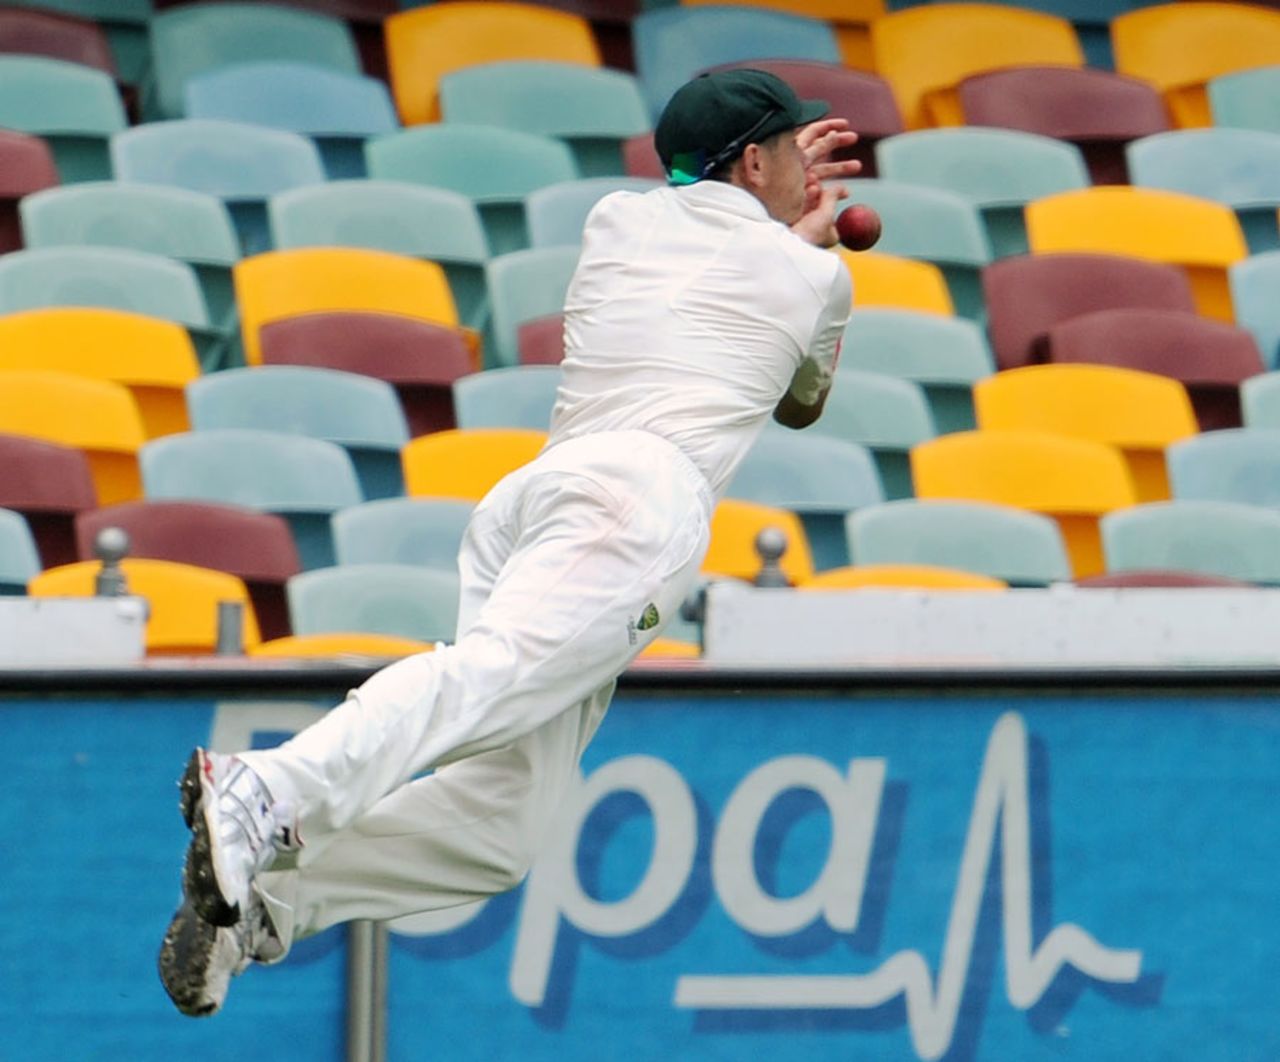 James Pattinson nearly pulled off a difficult catch that would have given David Warner a first-ball wicket, Australia v New Zealand, 1st Test, Brisbane, 4th day, December 4, 2011